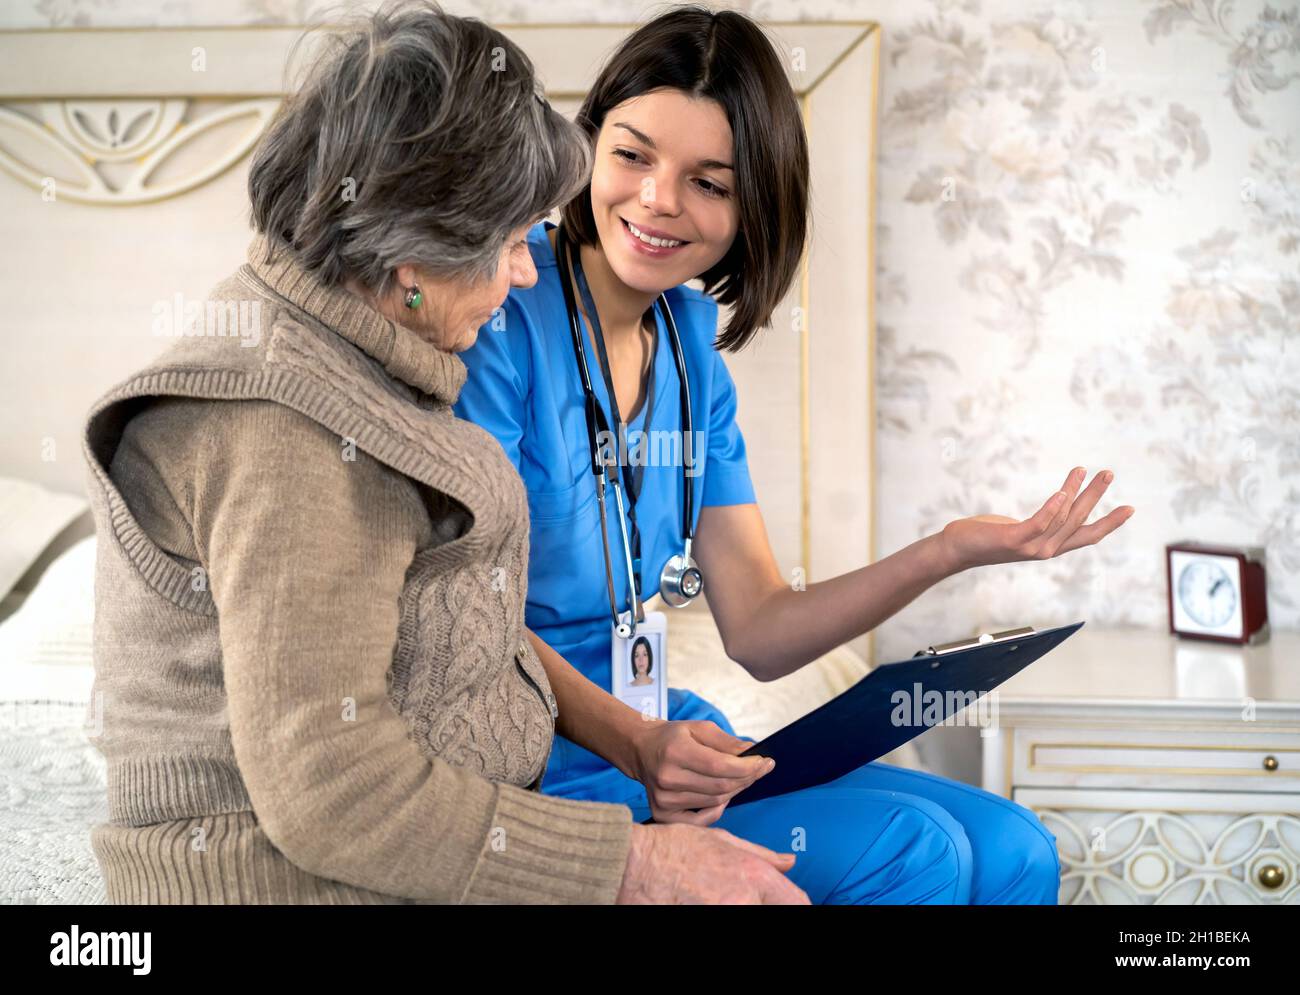 Young nurse is caring for an elderly 80 year-old woman at home. Stock Photo